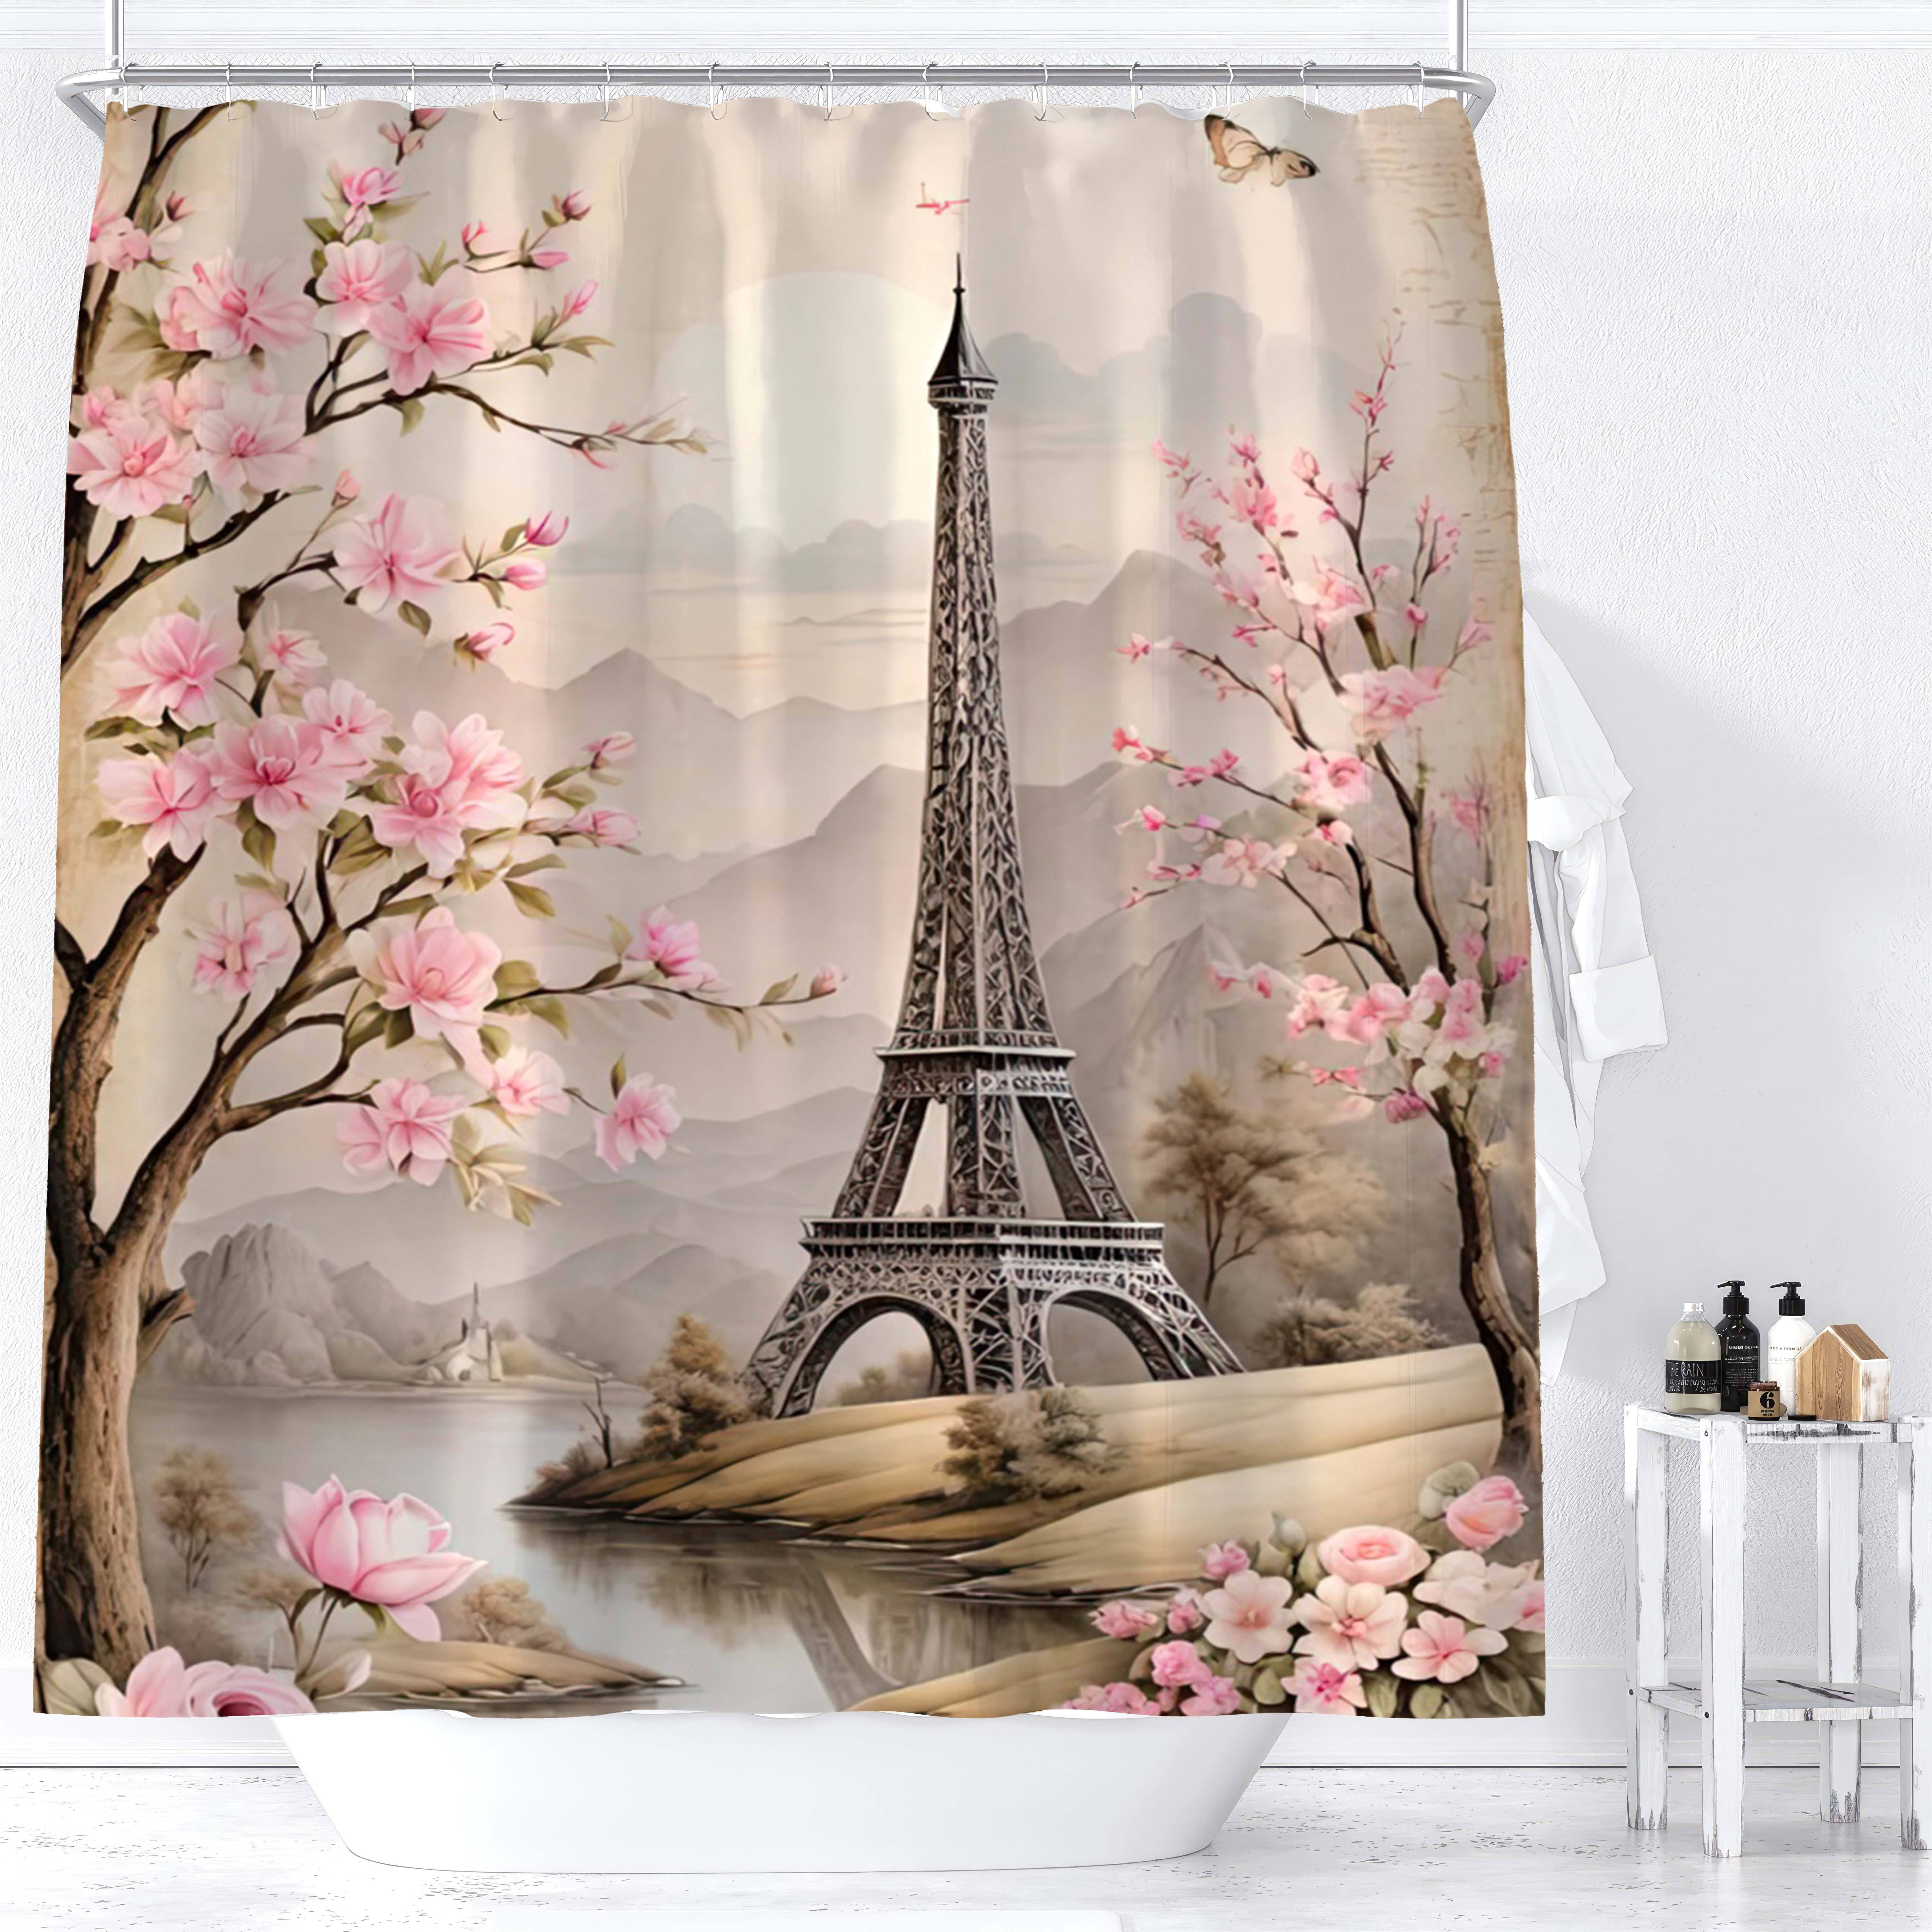 

1pc Eiffel Tower Shower Curtain, Romantic Paris Scenery With Bloom Cherry Trees, Digital Print Bathroom Decor, Waterproof Fabric, For Home And Hotels